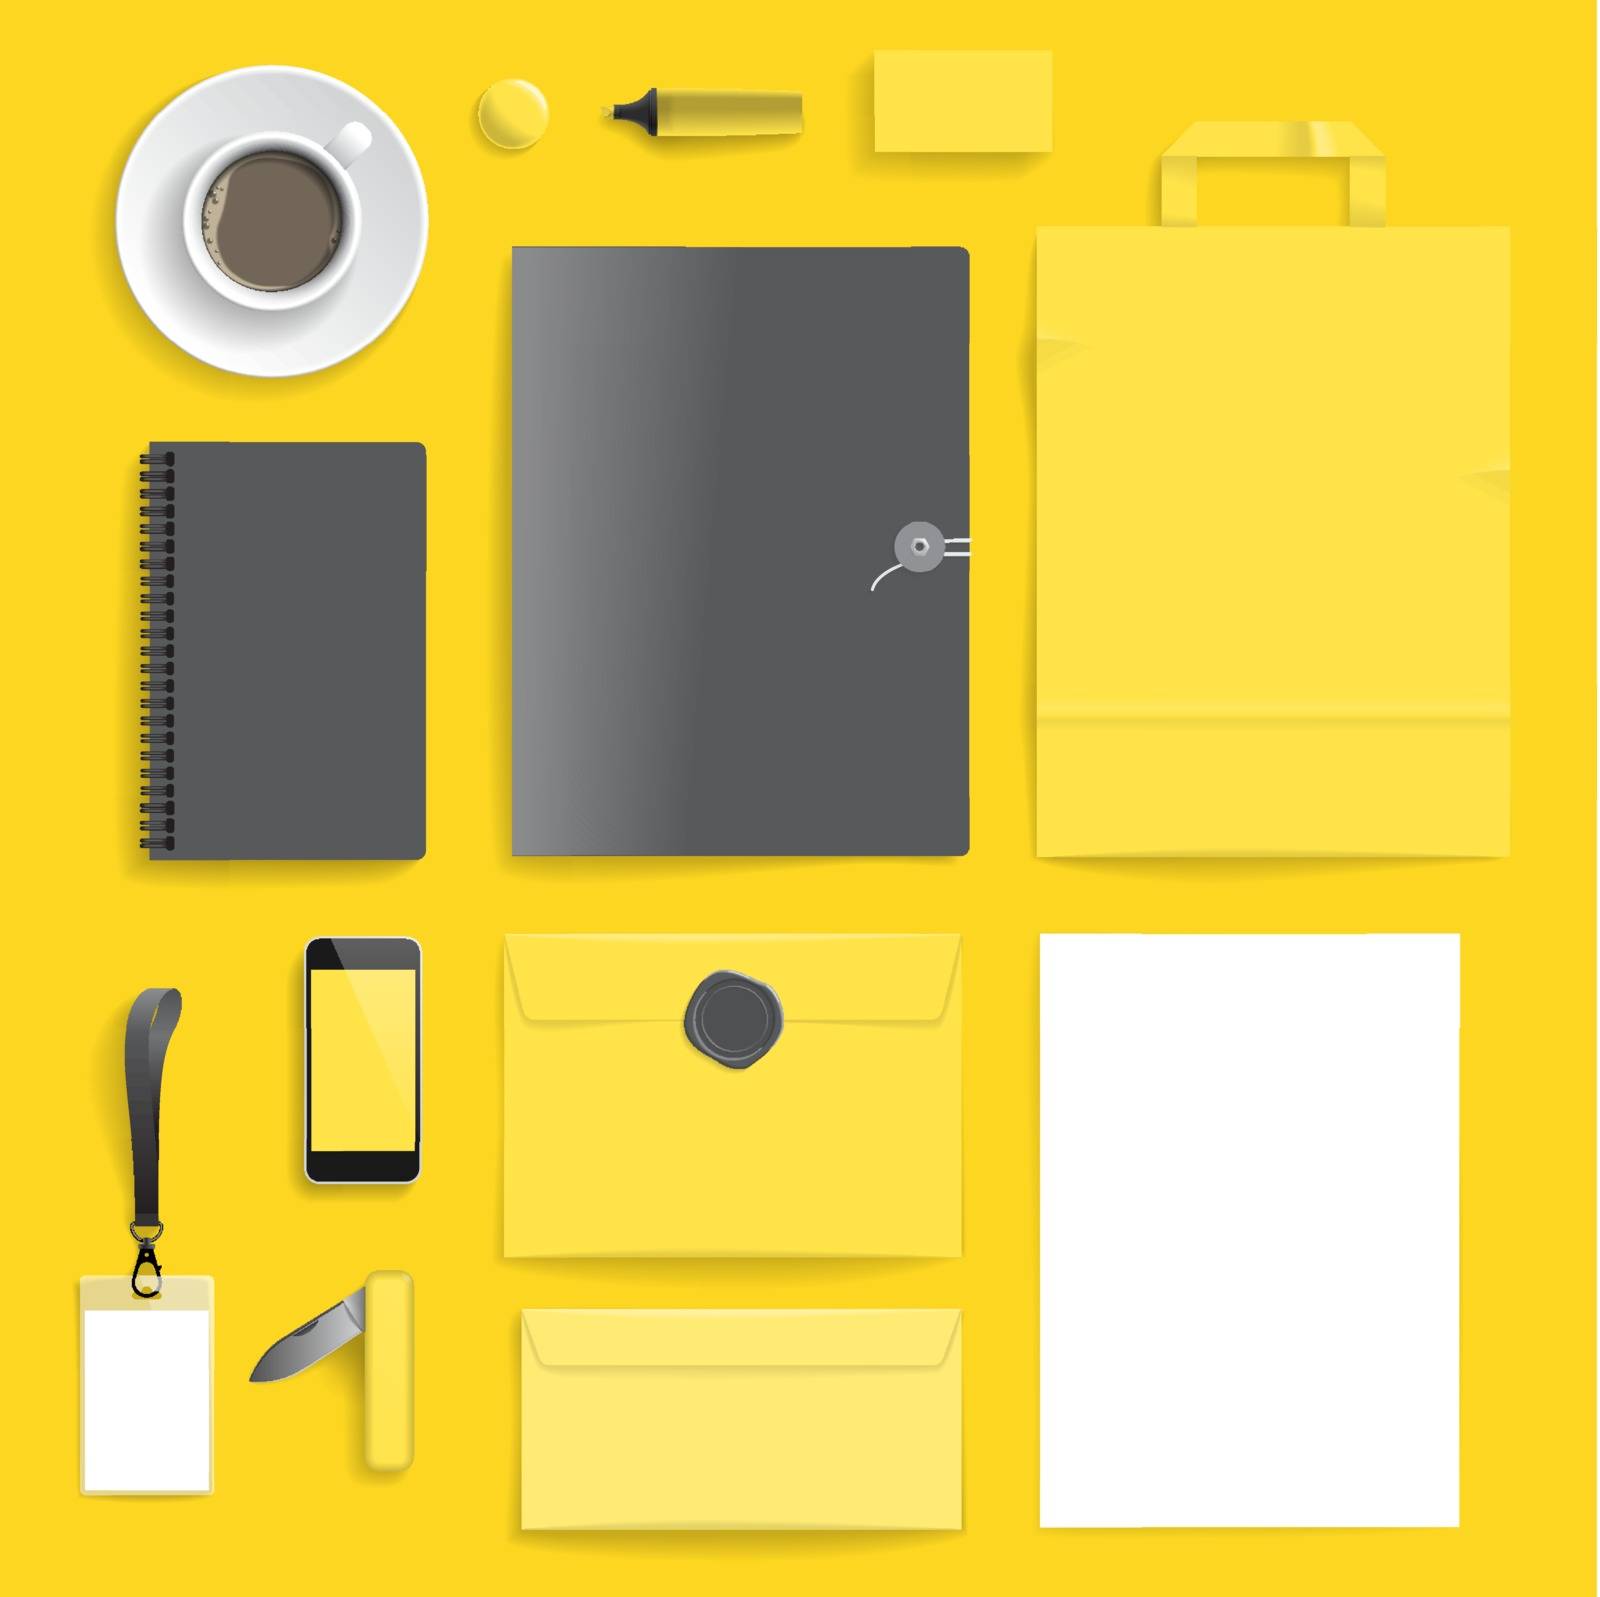 Corporate identity template on yellow background. Use layer "Print" in vector file to recolor objects. Eps-10 with transparency.